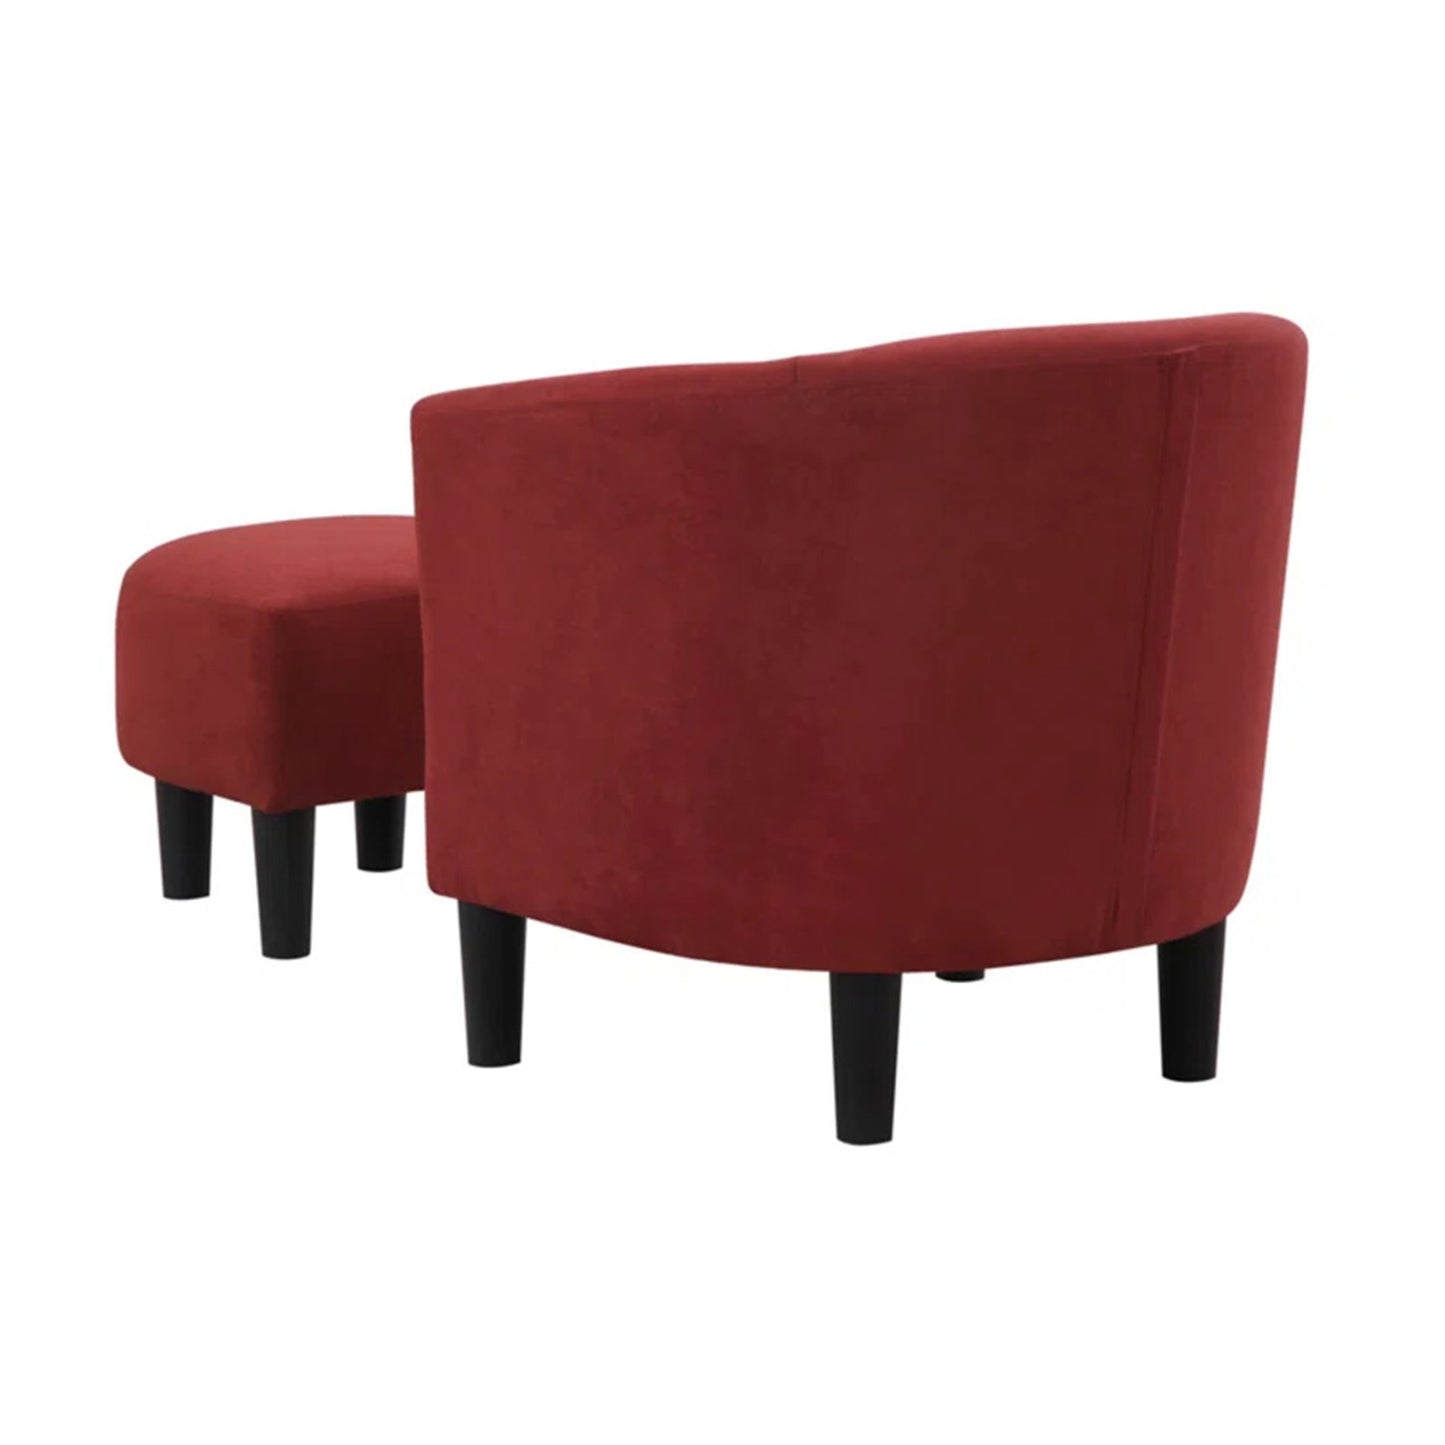 Sleek Accent Chairs With Ottomans Footrest Red